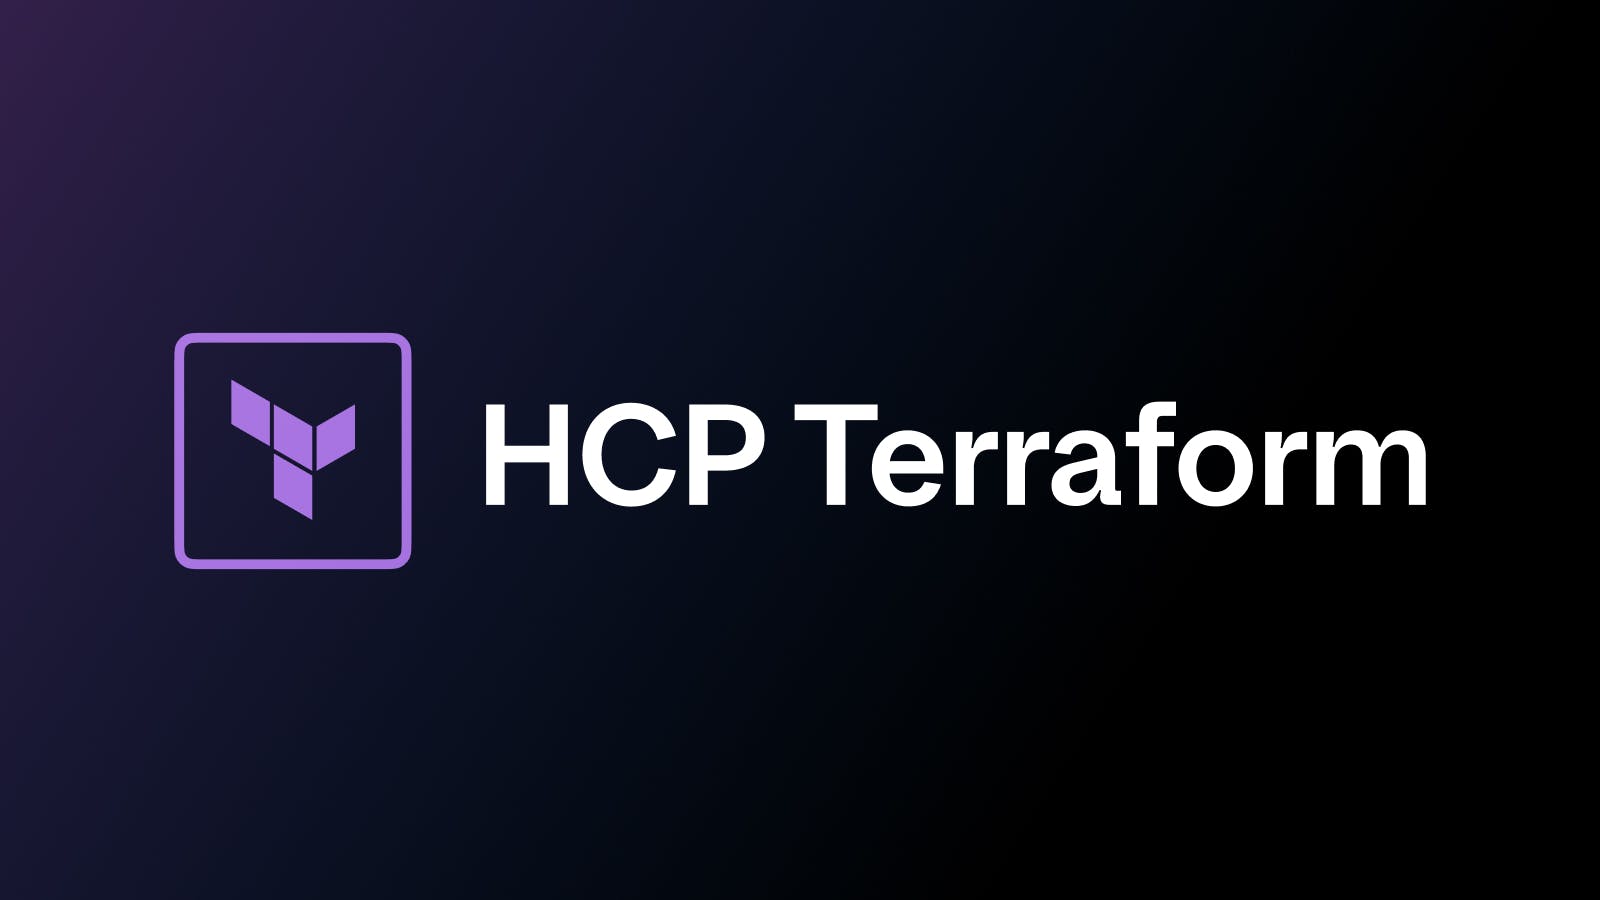 Terraform Cloud no-code provisioning is now GA with new features  